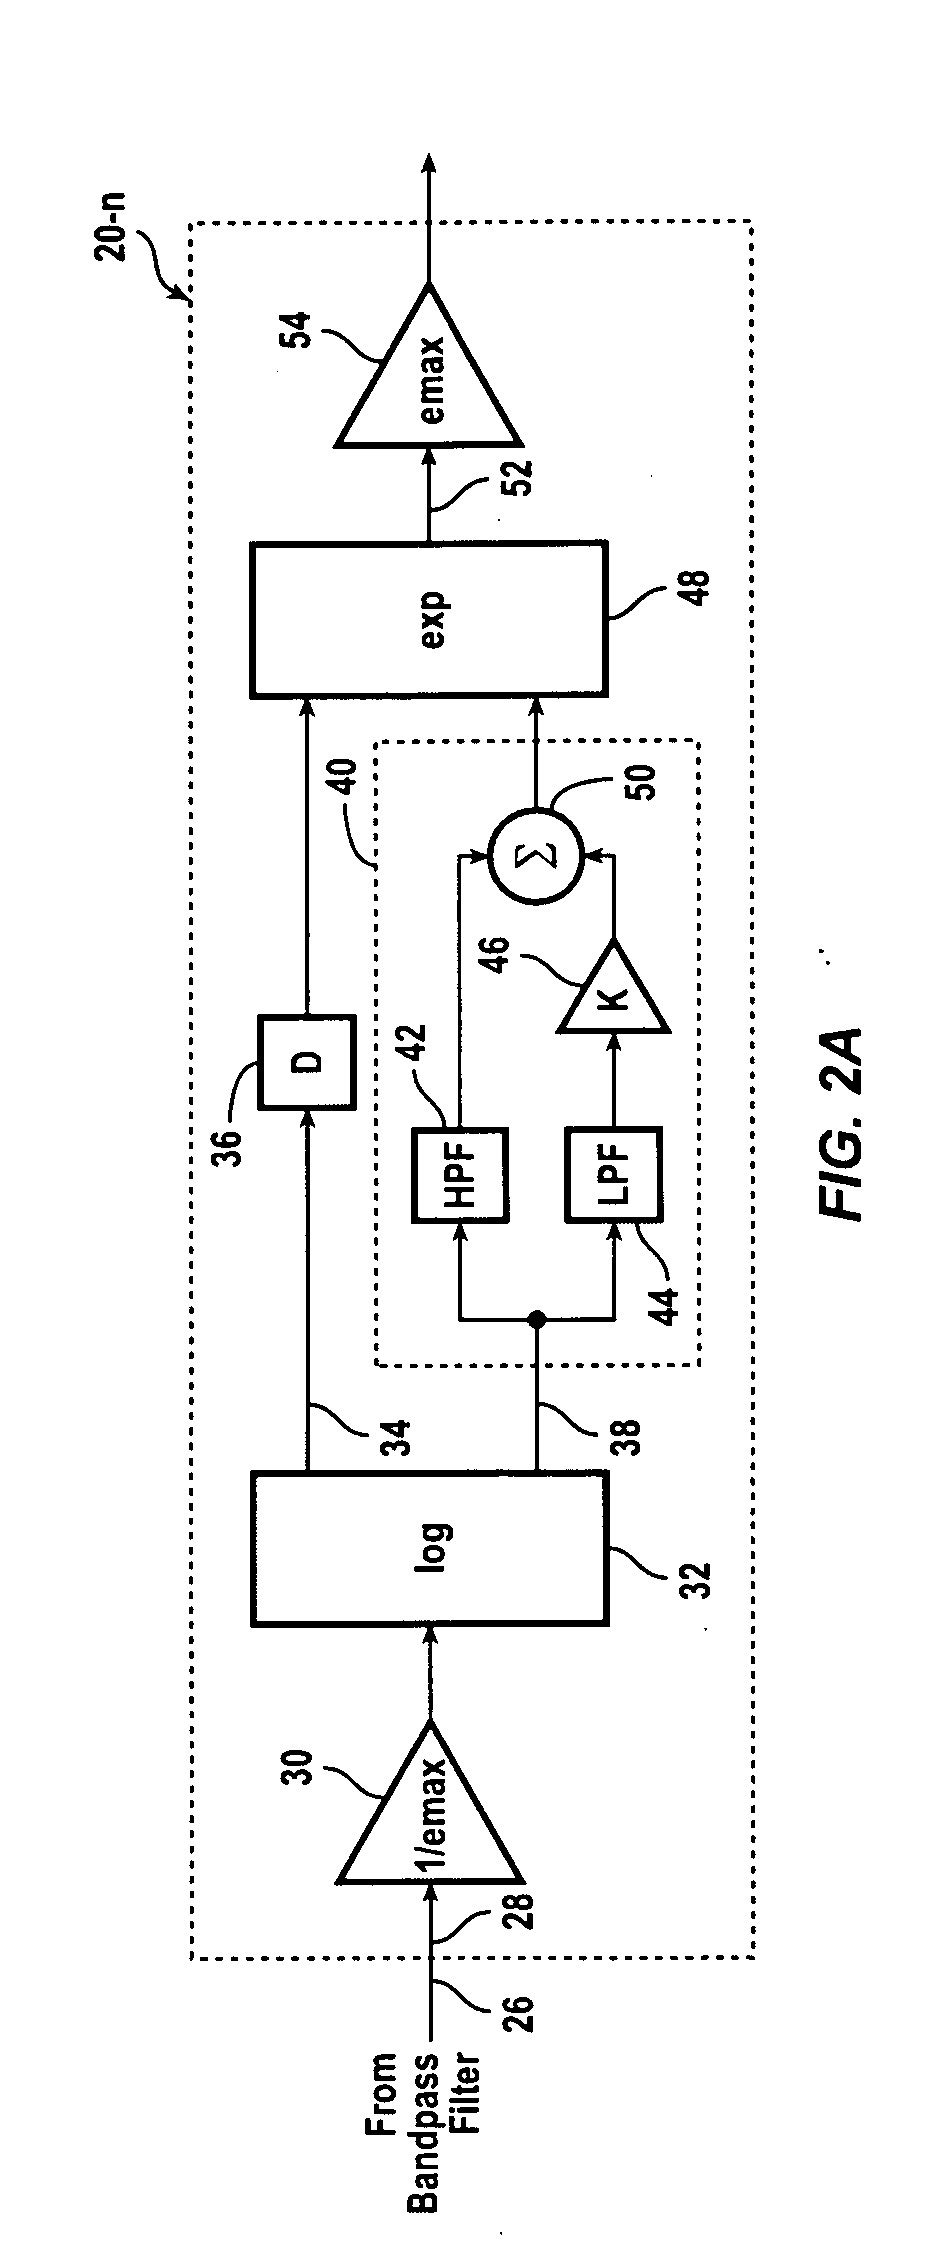 Hearing compensation system incorporating signal processing techniques